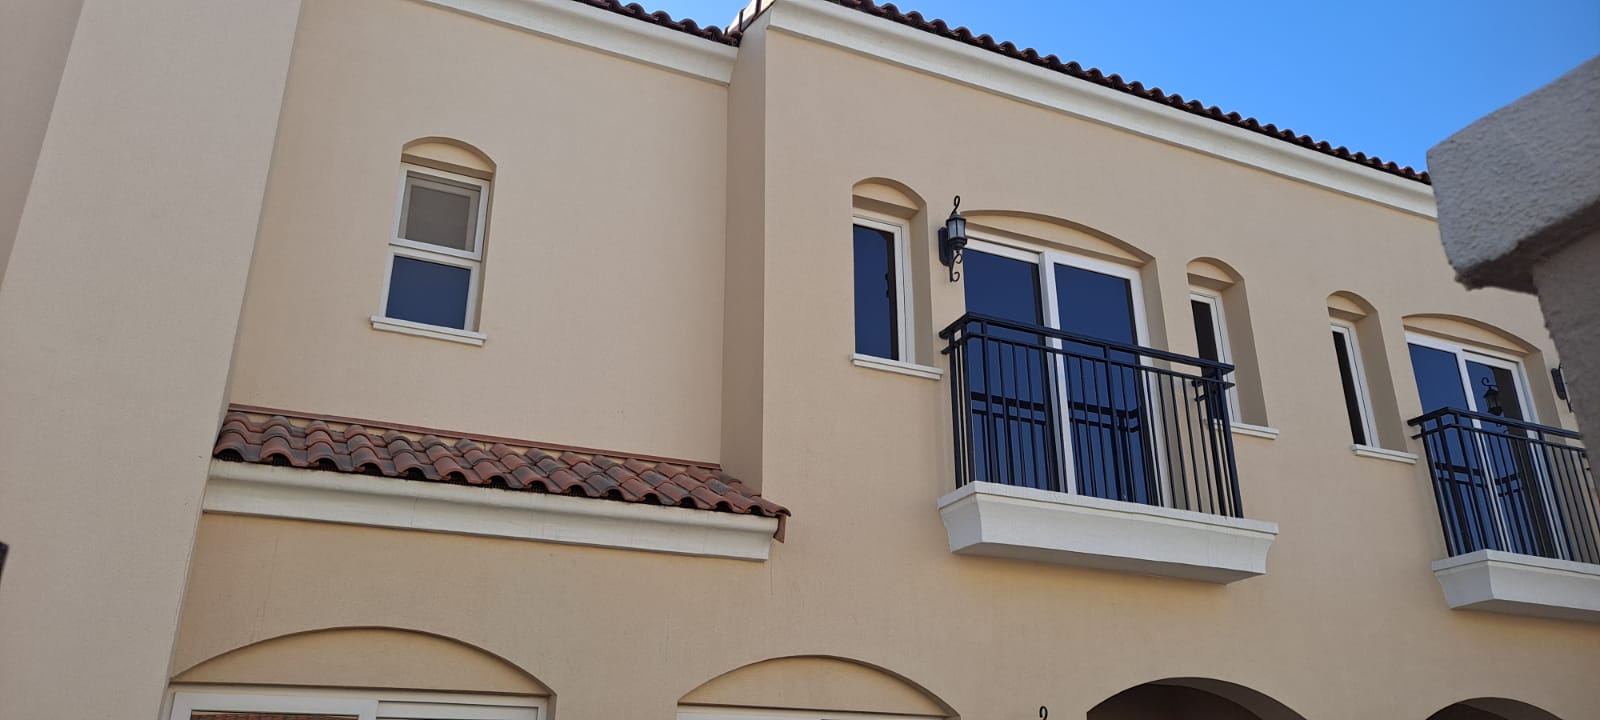 3 Bedroom Townhouse | Middle Unit | Brand New